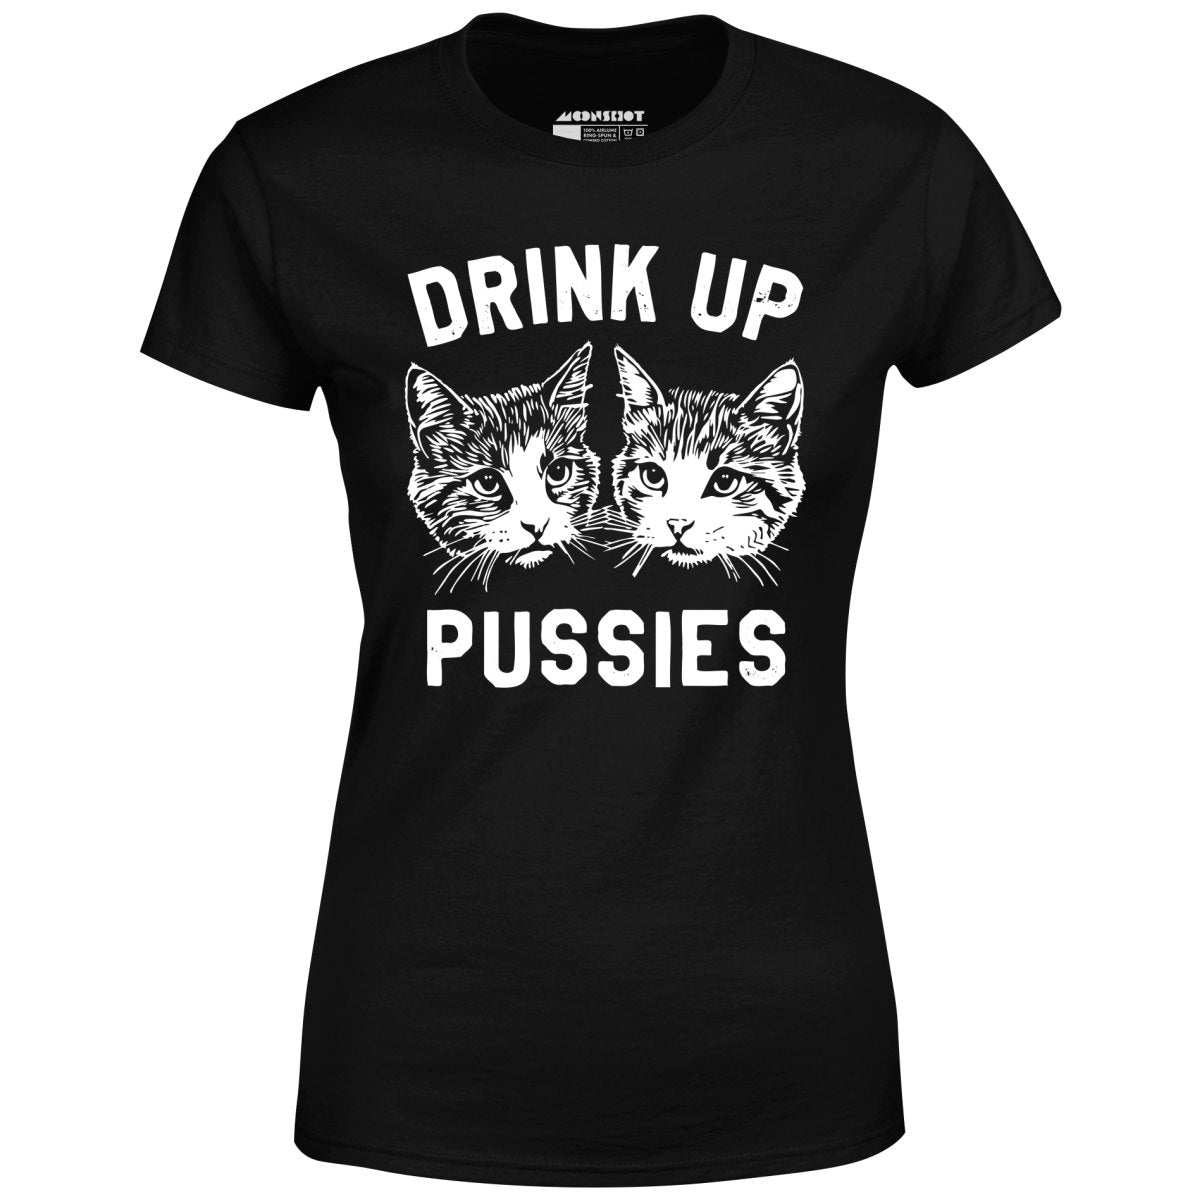 Drink Up Pussies - Women's T-Shirt